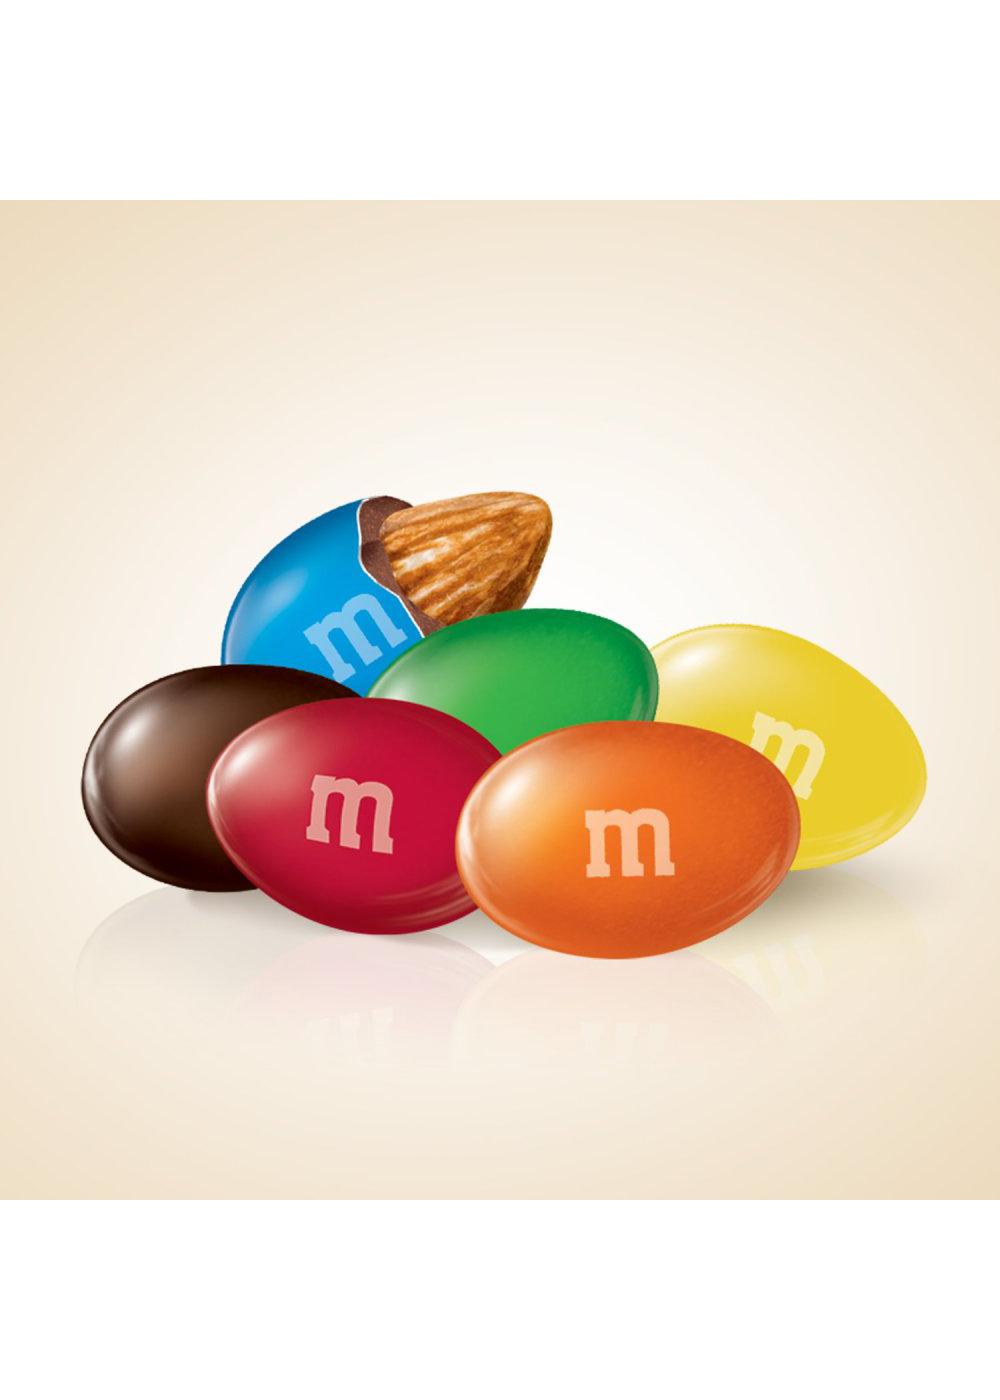 M&M's Candy, Sharing Size, Resealable Milk Chocolate